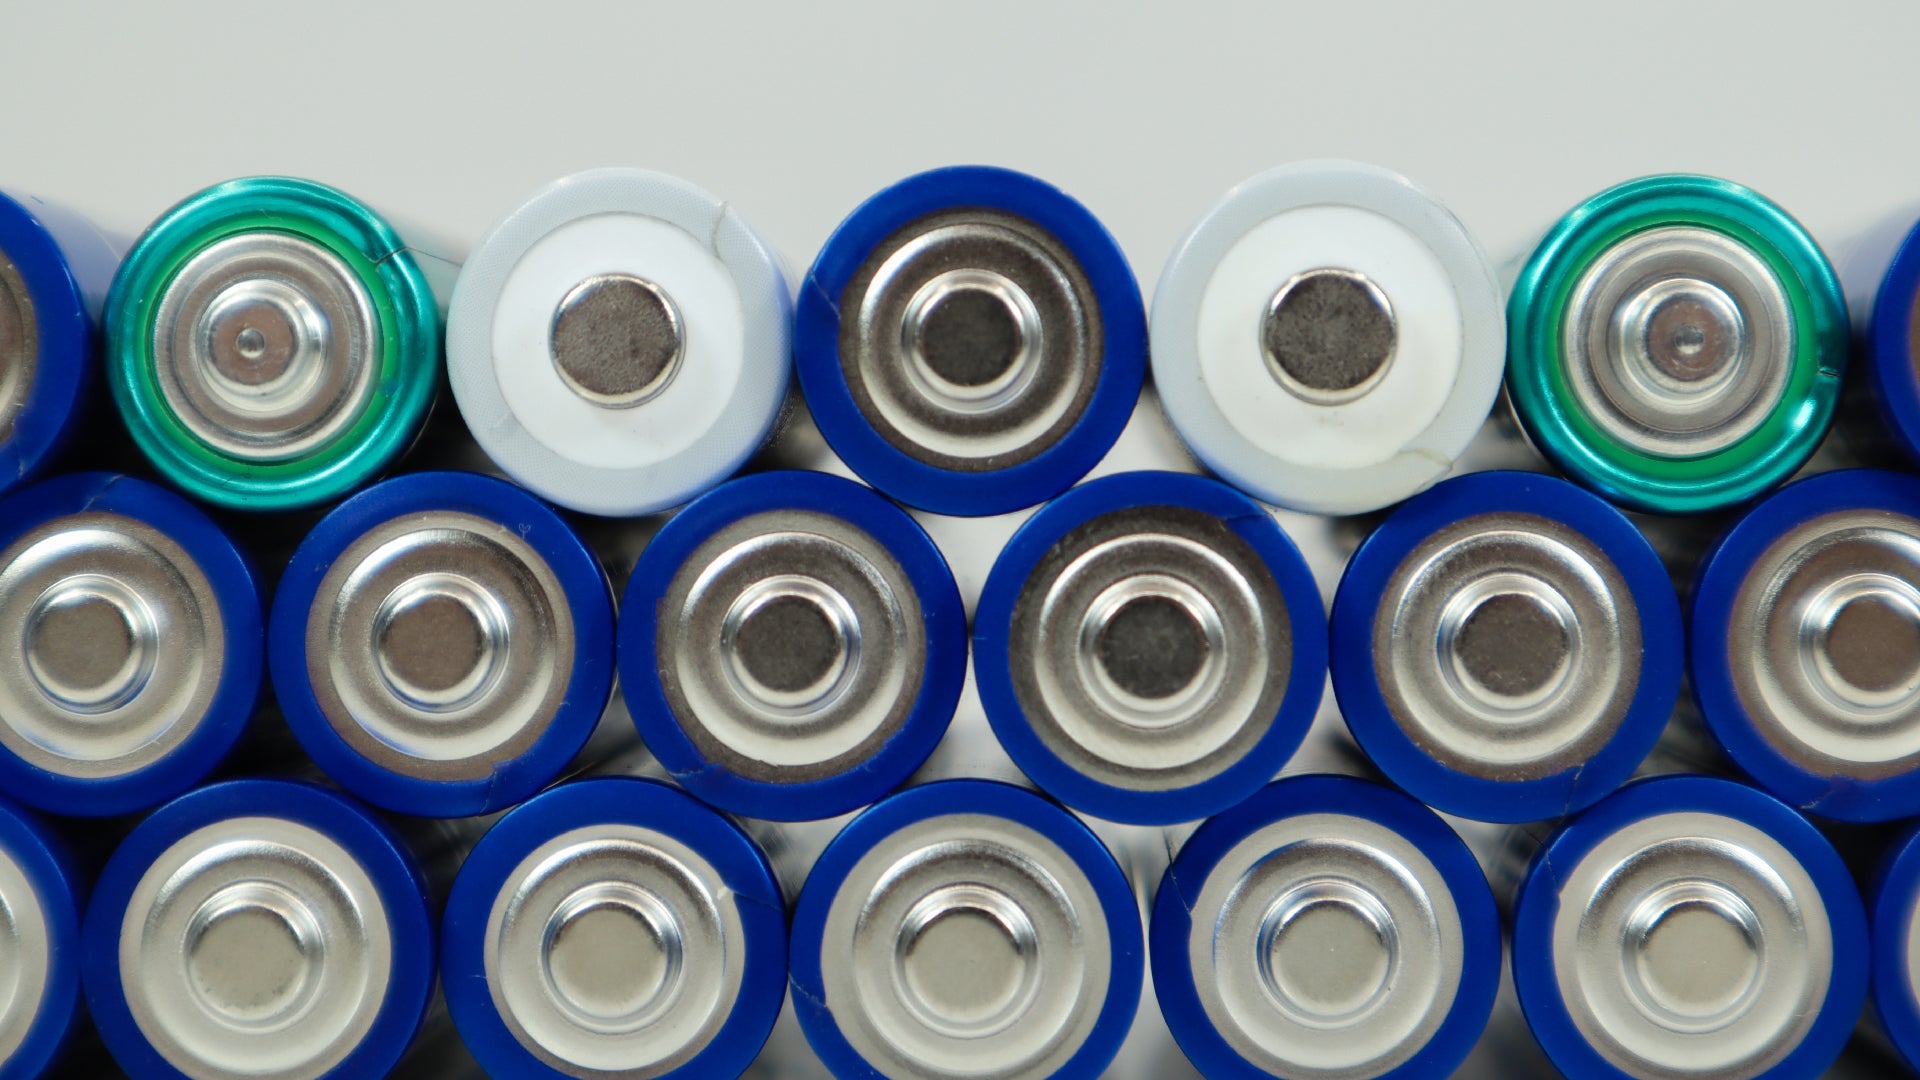 CPSC Issues Warning concerning 18650 Batteries